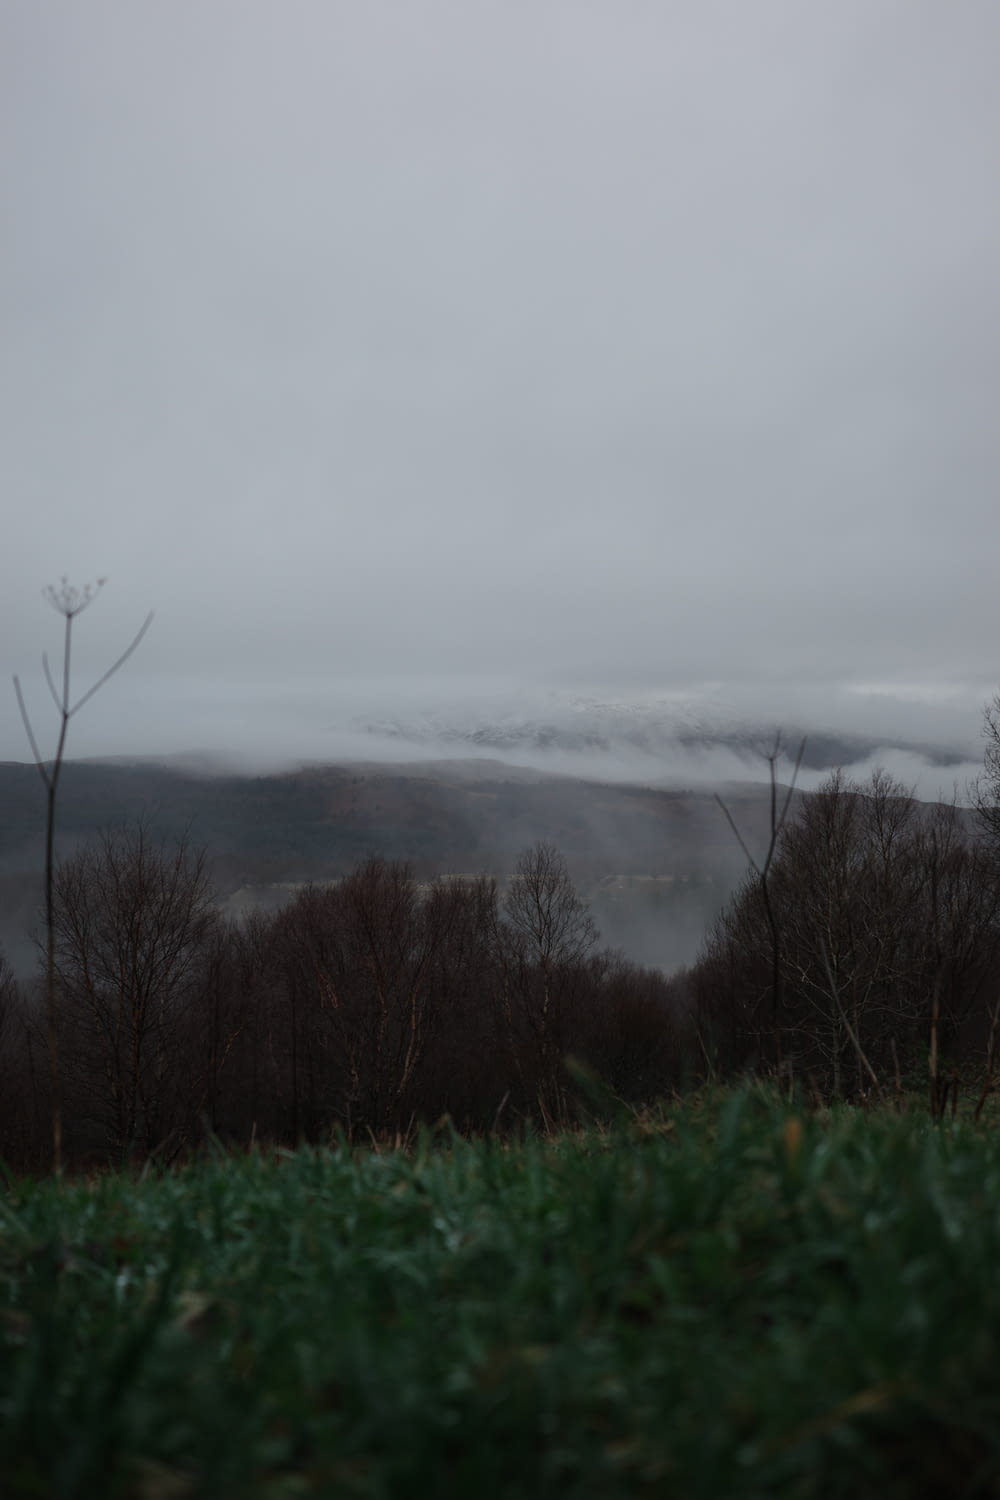 a foggy landscape with trees and a hill in the distance